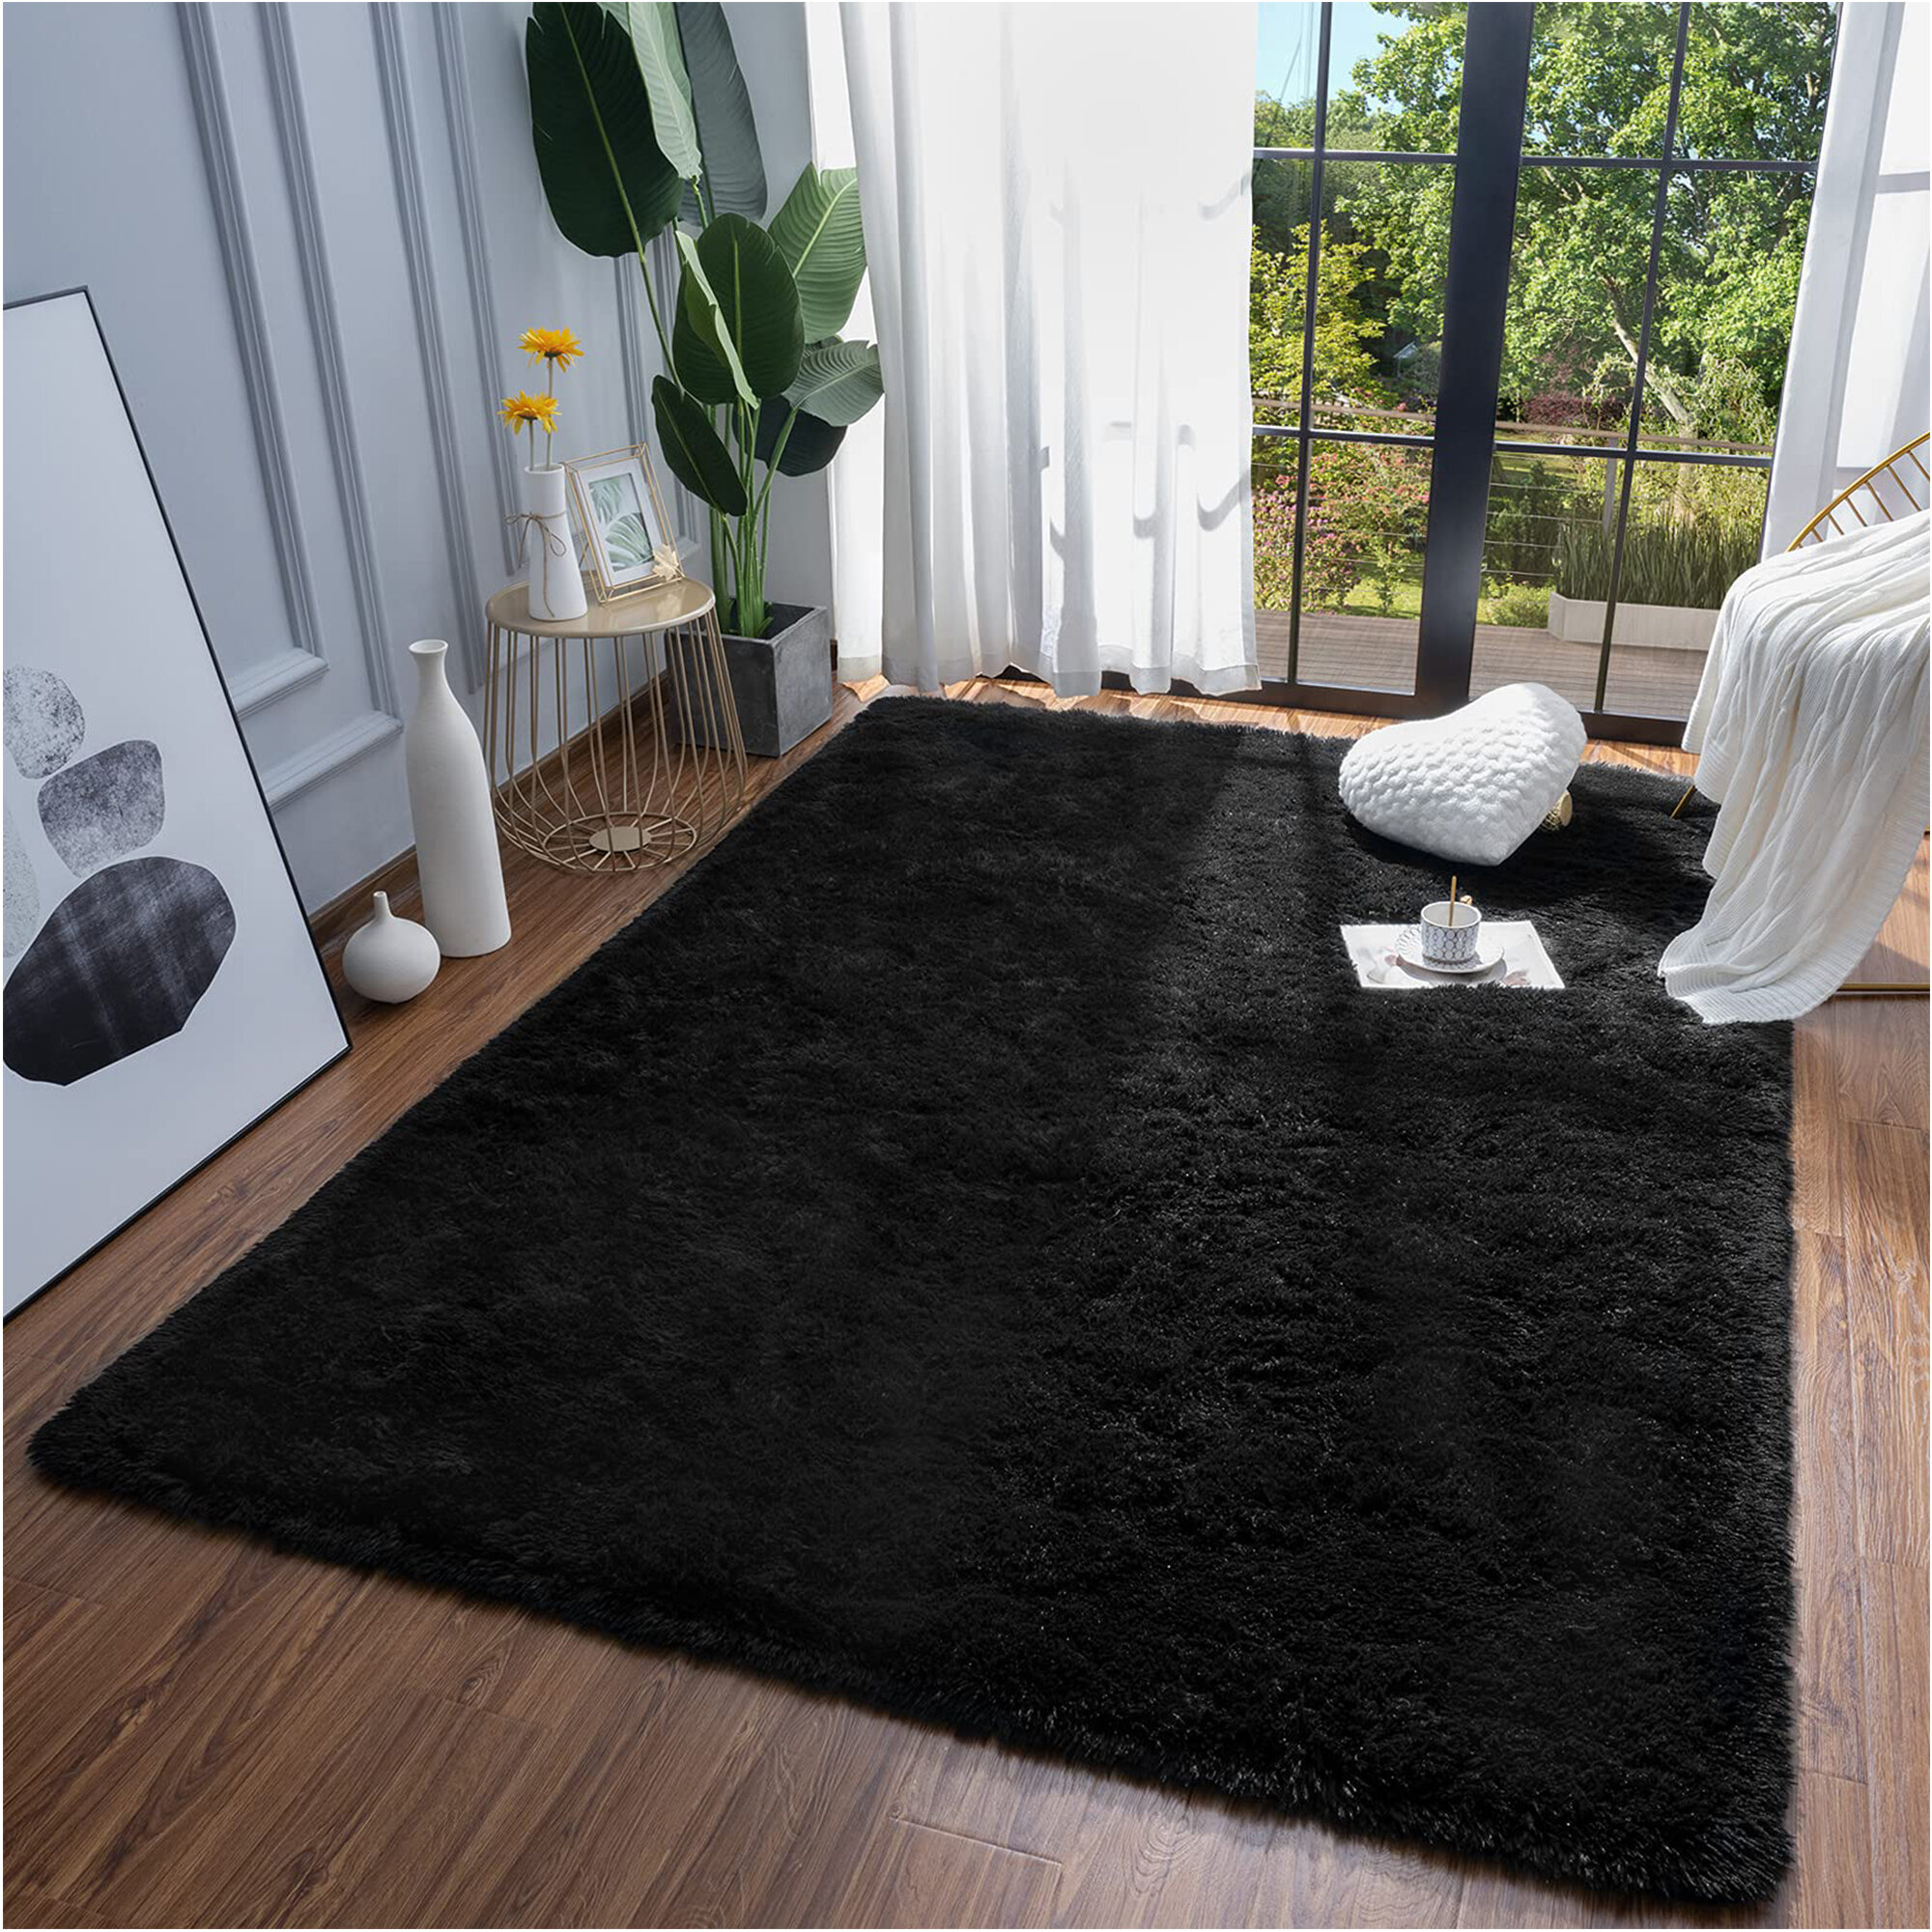 NEW Fluffy Furry Deep Thick Soft Shaggy Area Rug for Living Room Bedroom Floor 